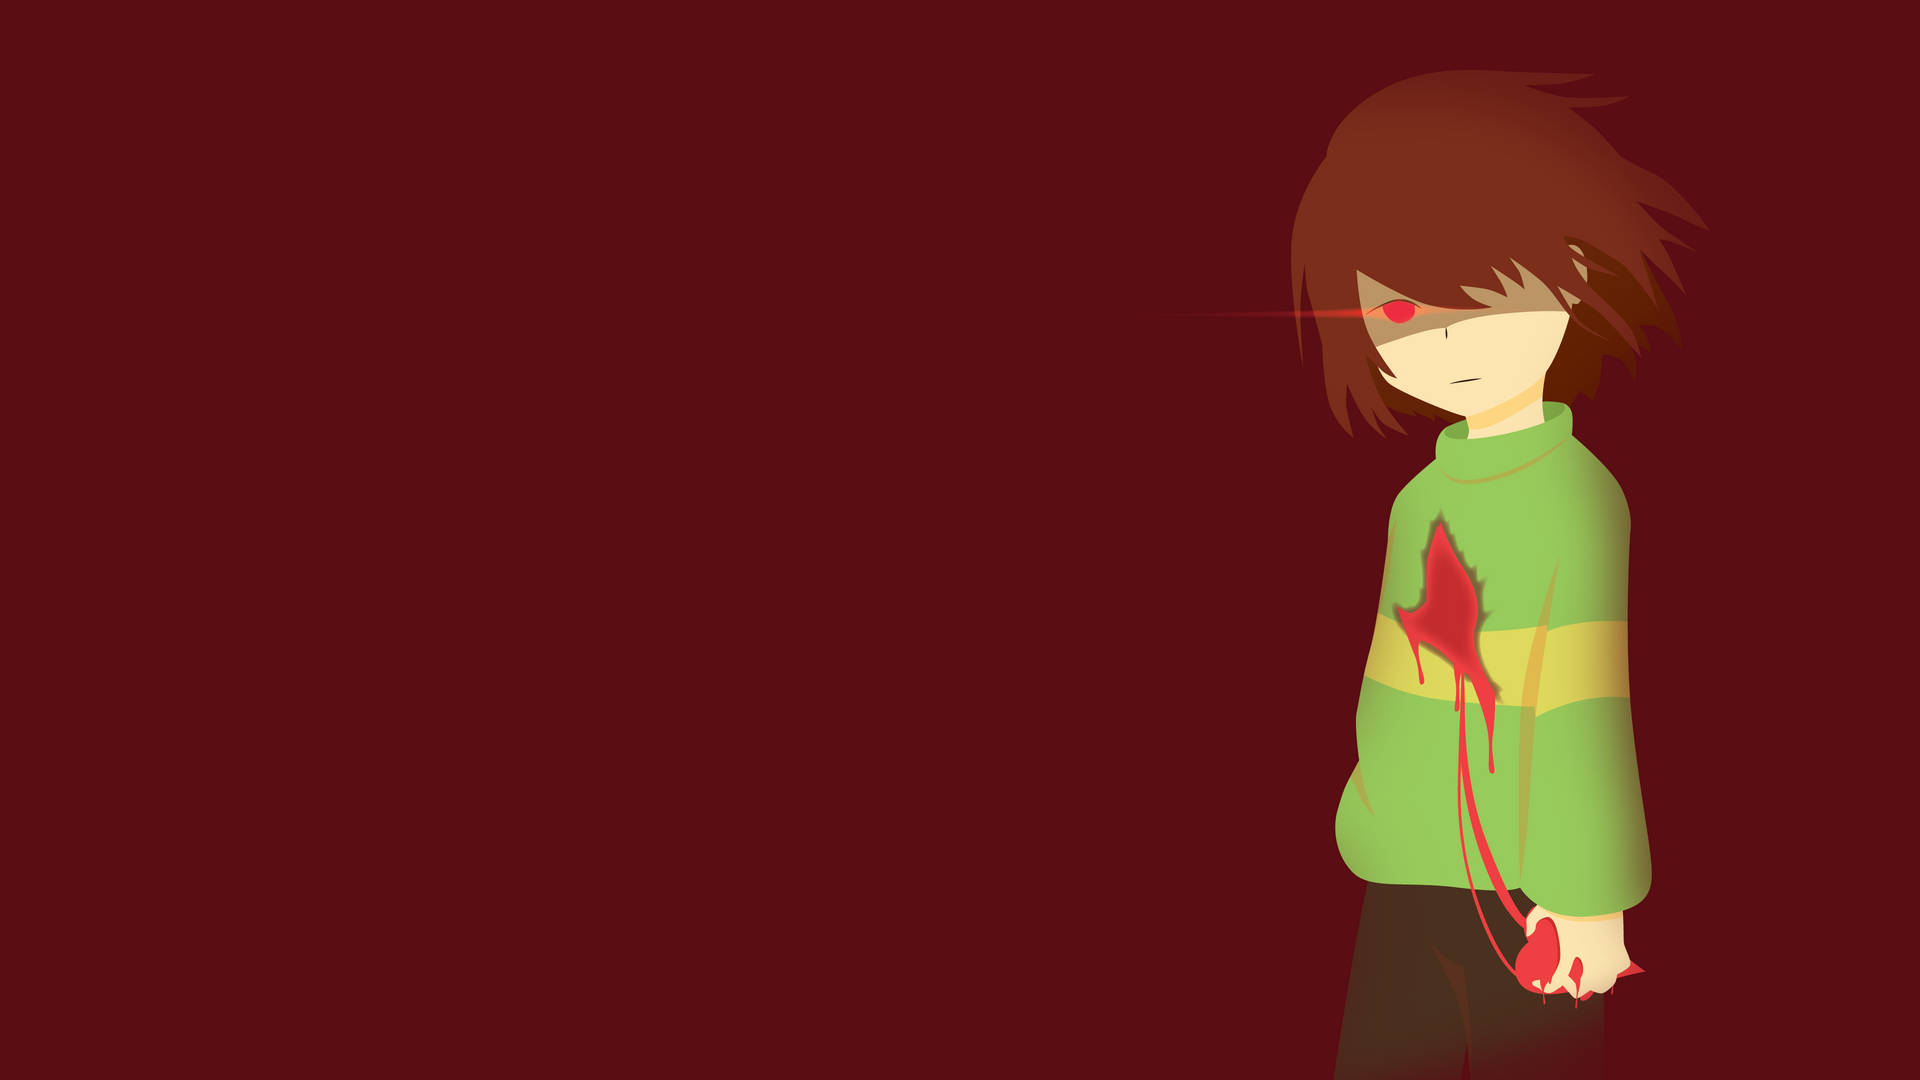 "A magical adventure awaits with Kris from Deltarune" Wallpaper